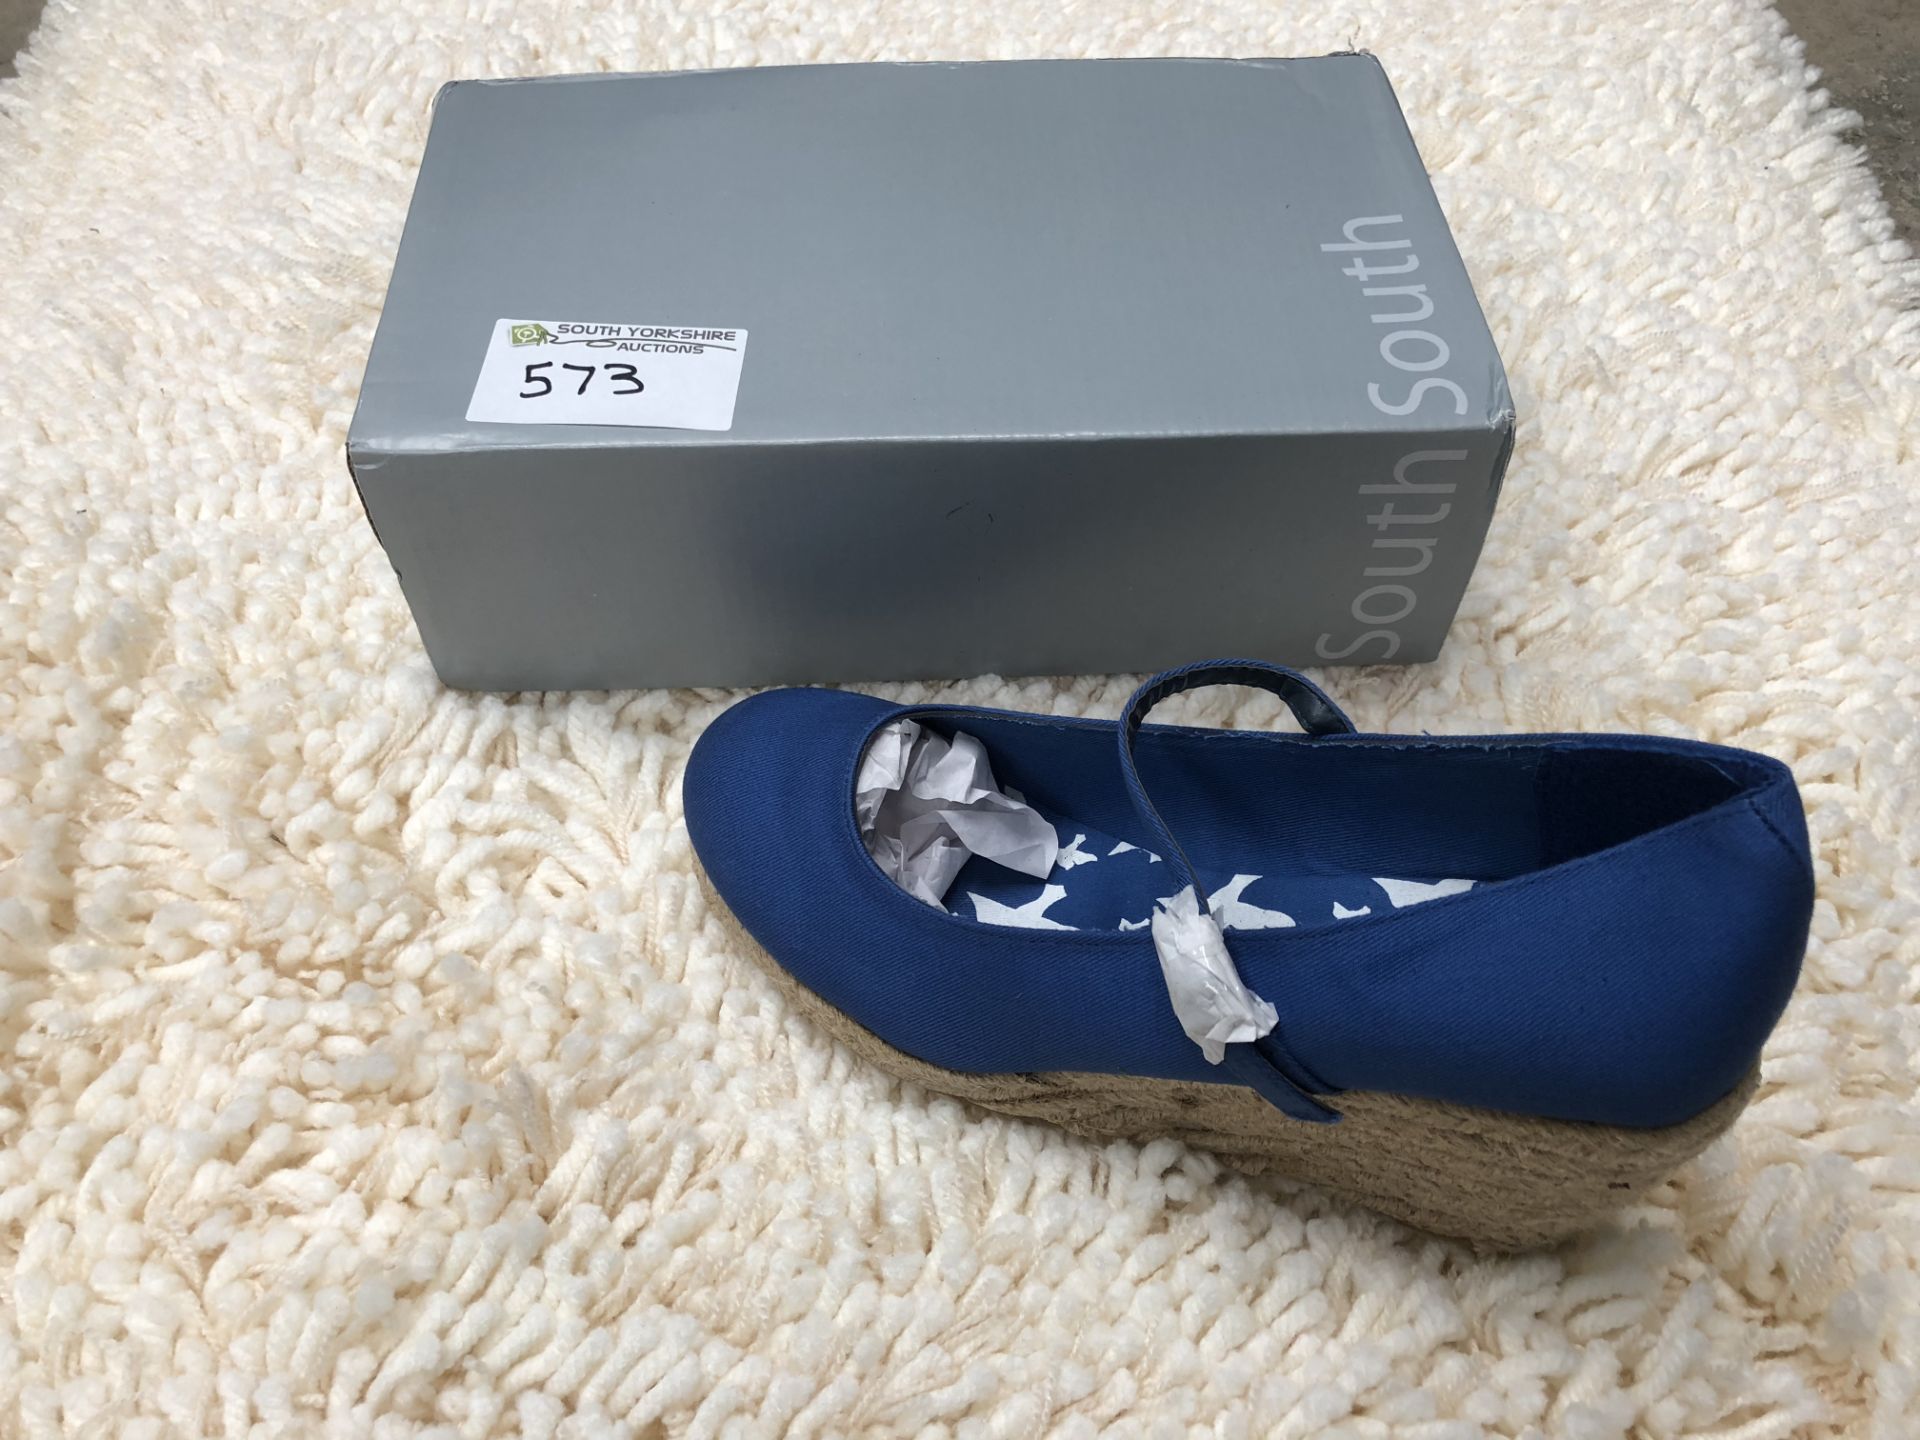 South,Size 5, Blue Wedges, New and Boxed - Image 2 of 2